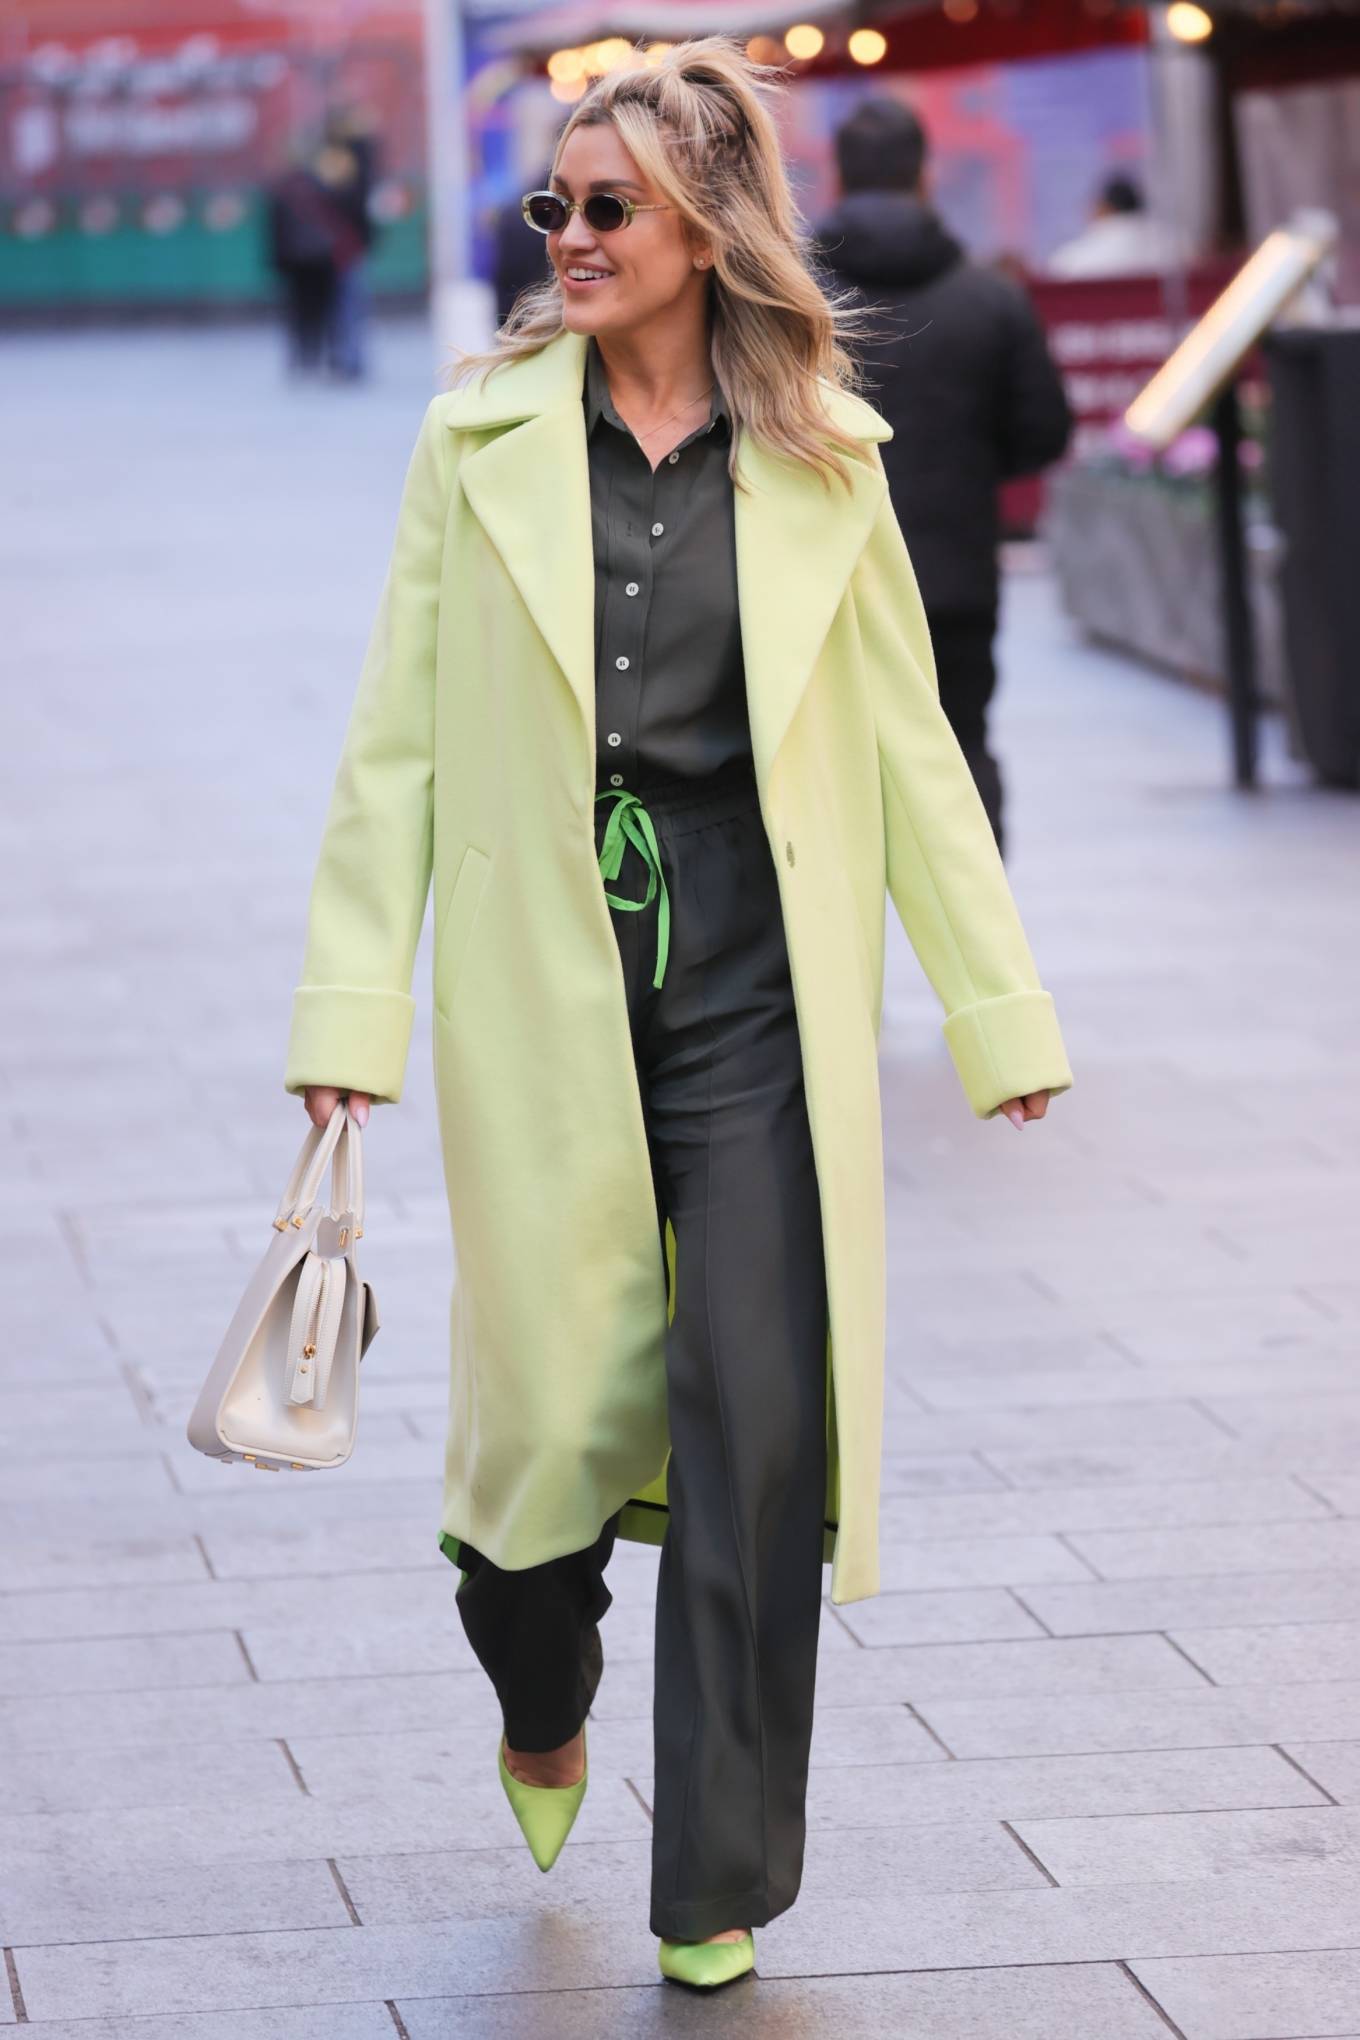 Ashley Roberts 2021 : Ashley Roberts – In a lime green trench coat at Heart radio in London-26